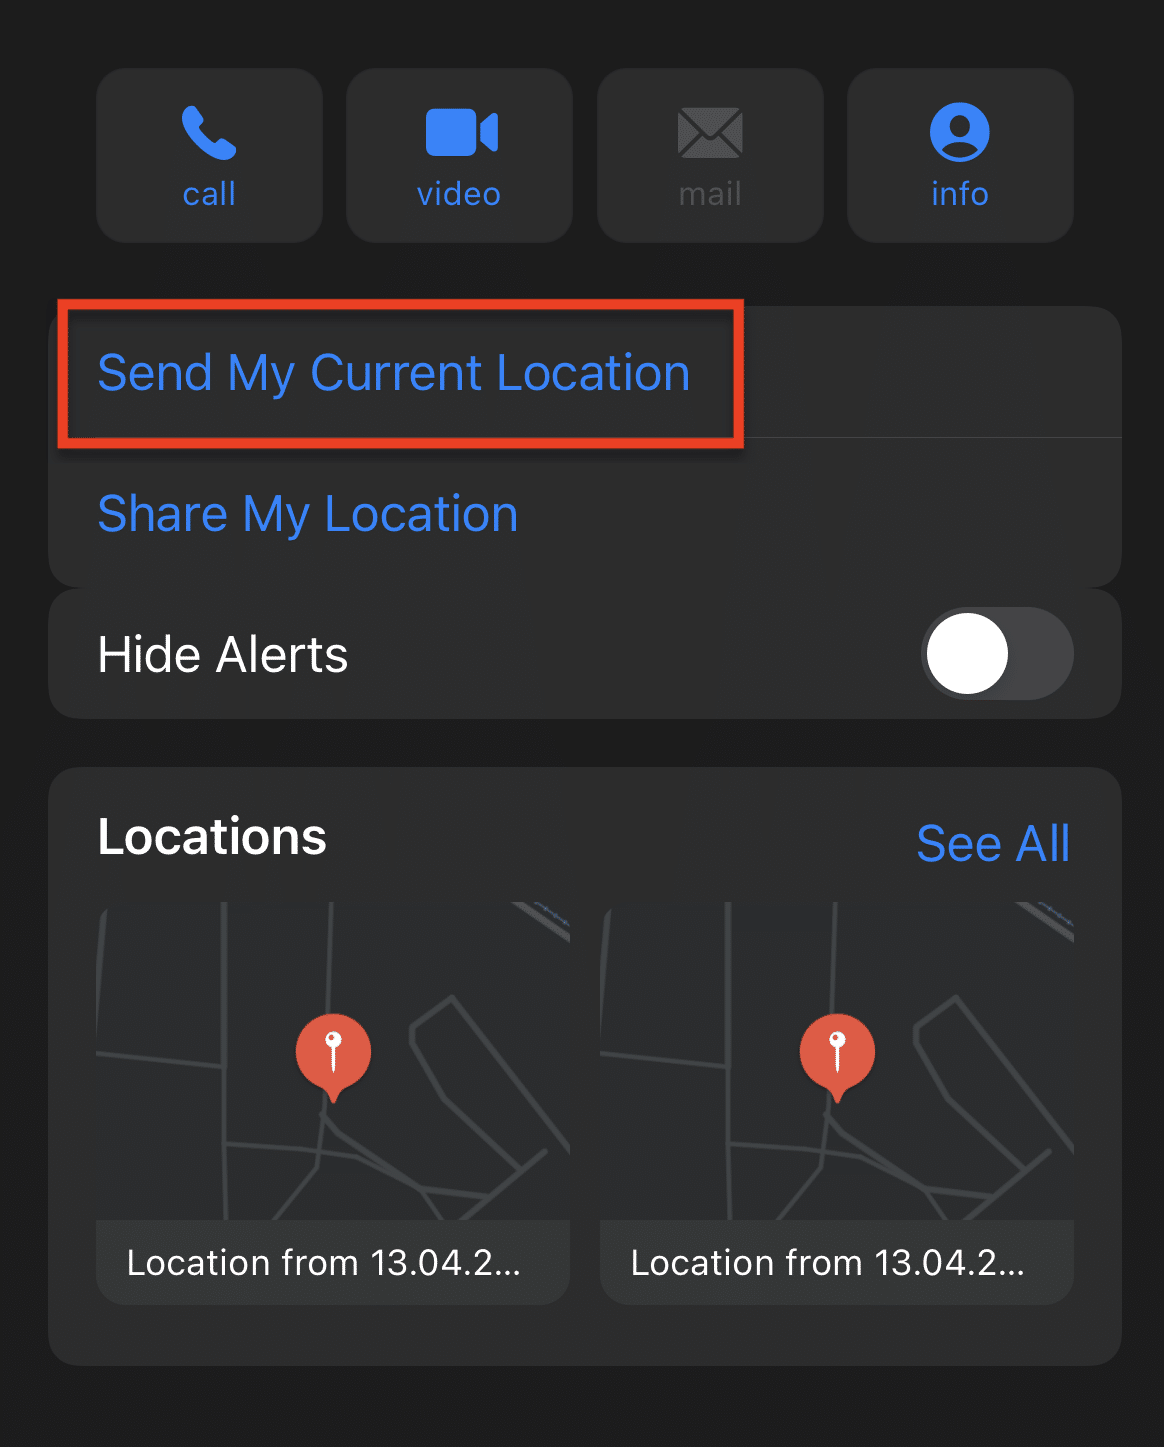 iPhone showing Send My Current Location option